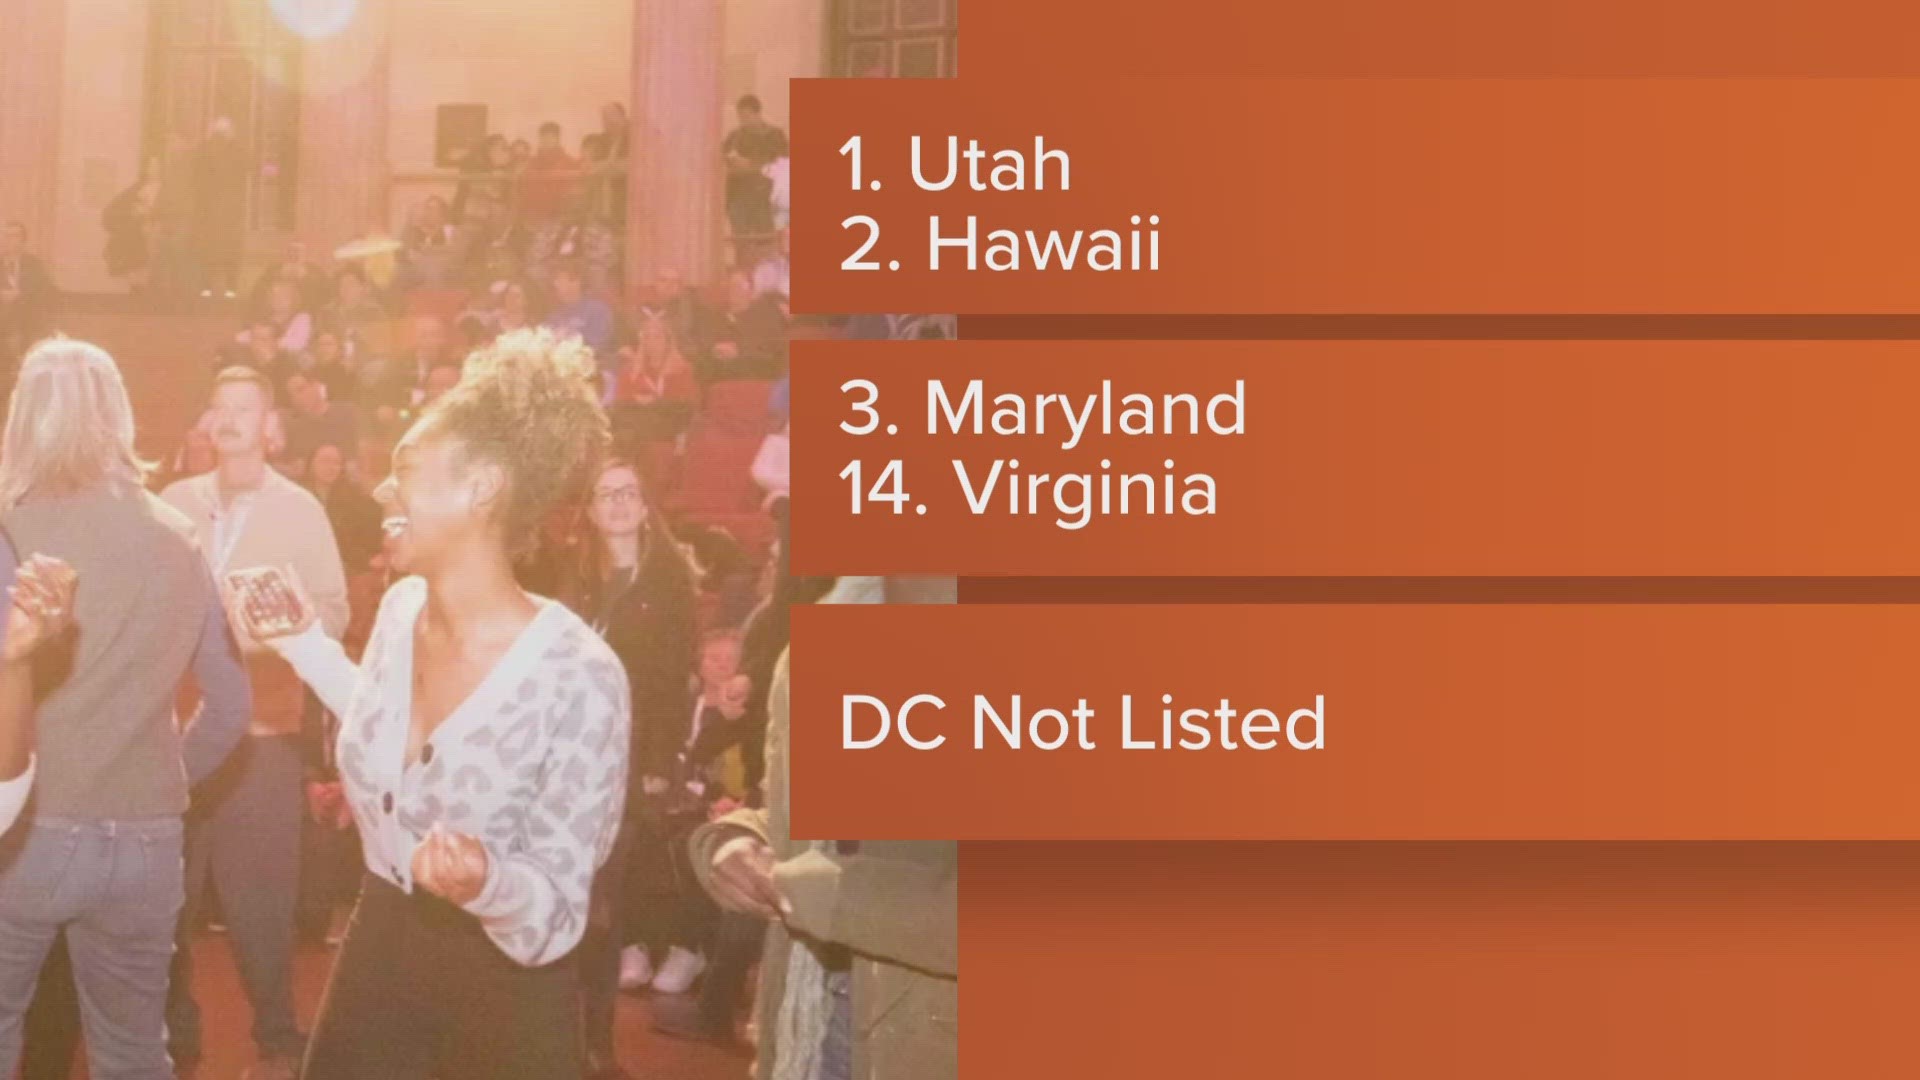 Maryland was only topped by Hawaii and Utah